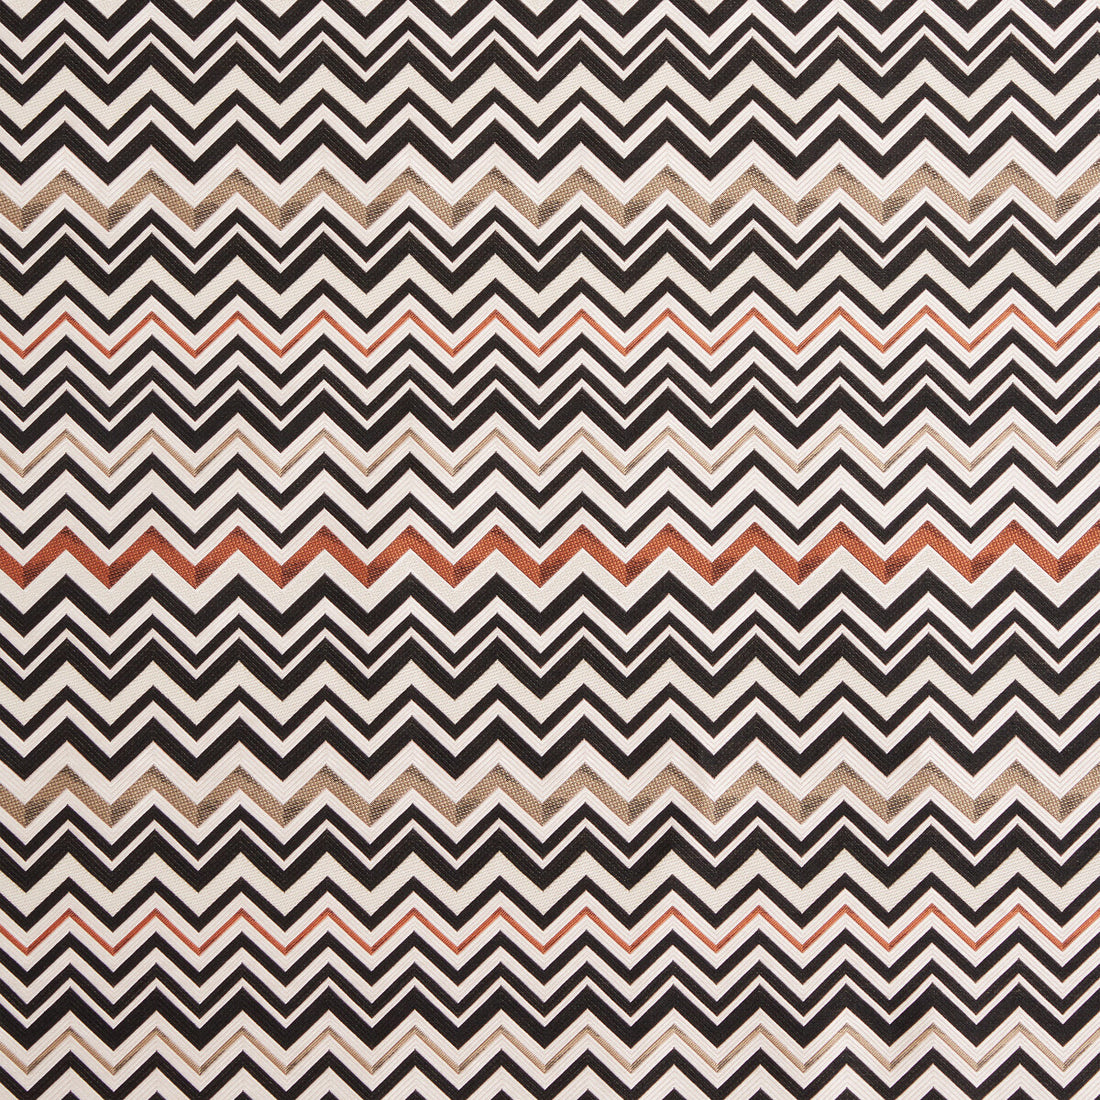 Belfast Fr fabric in 160 color - pattern 36707.86.0 - by Kravet Couture in the Missoni Home collection